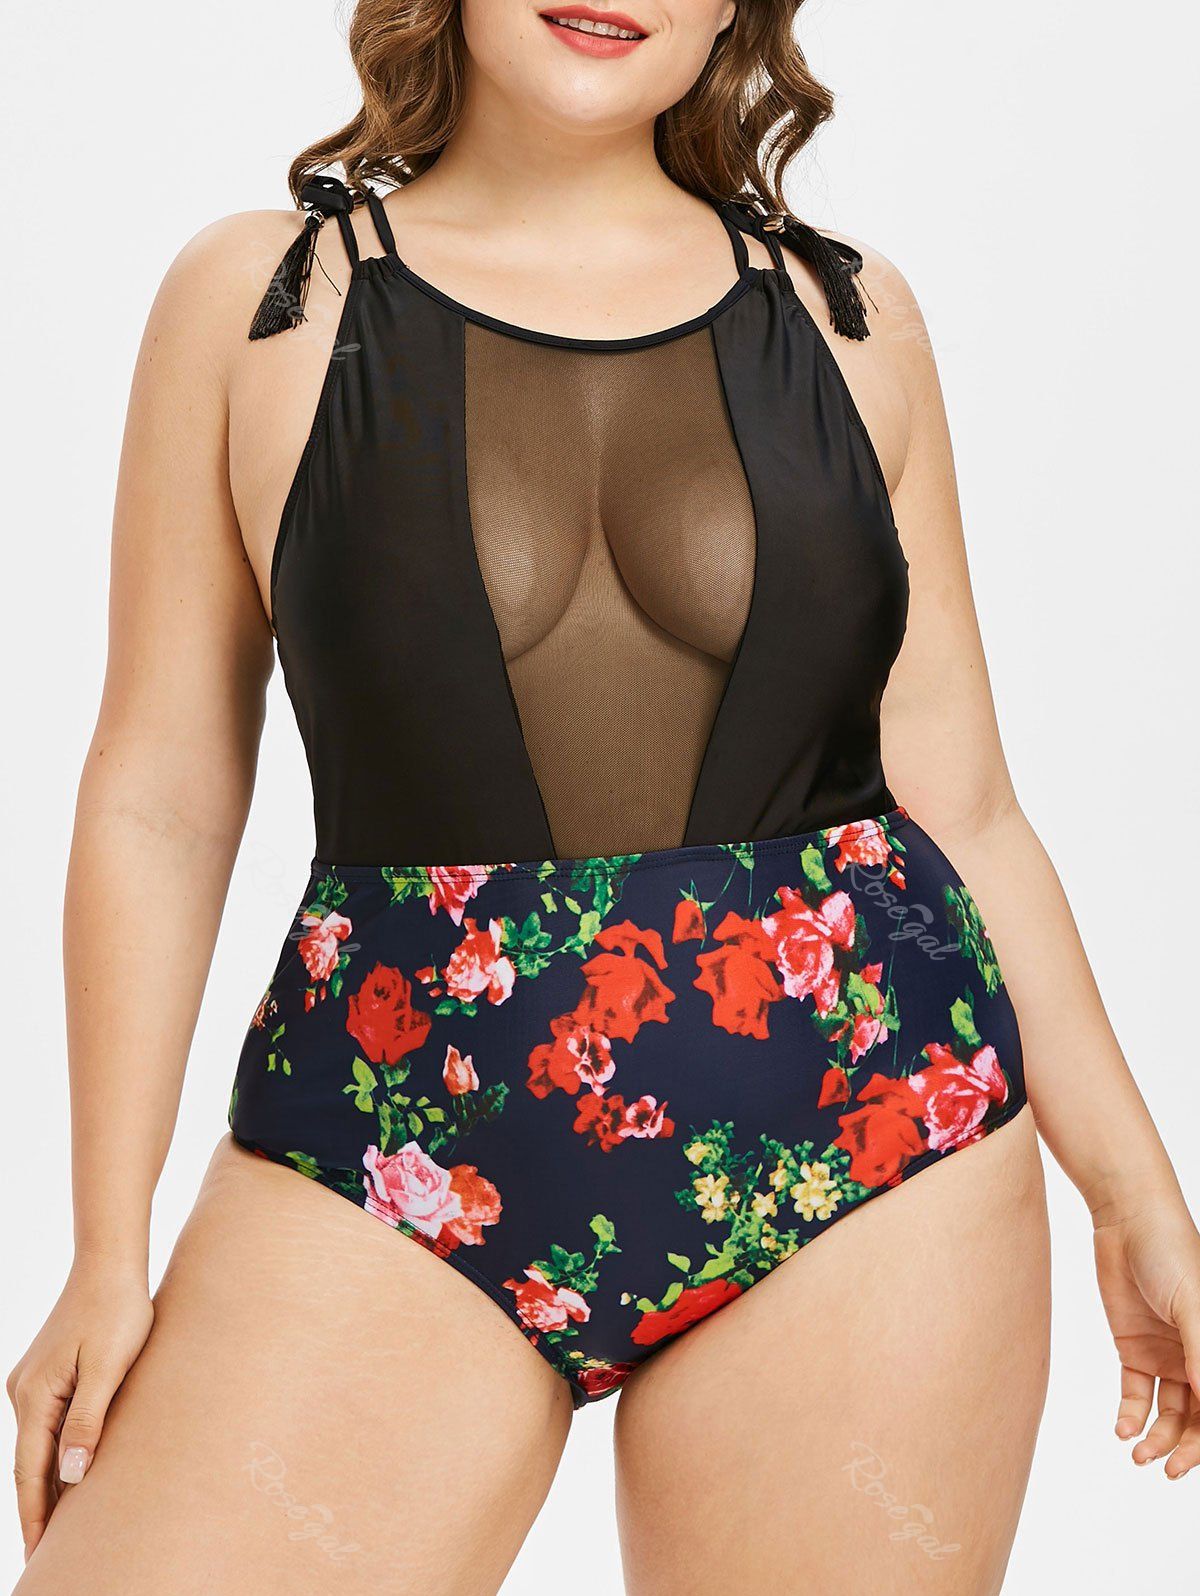 New Sheer Mesh Panel Floral Print Tassels Plus Size & Curve 1950s One-piece Swimsuit  